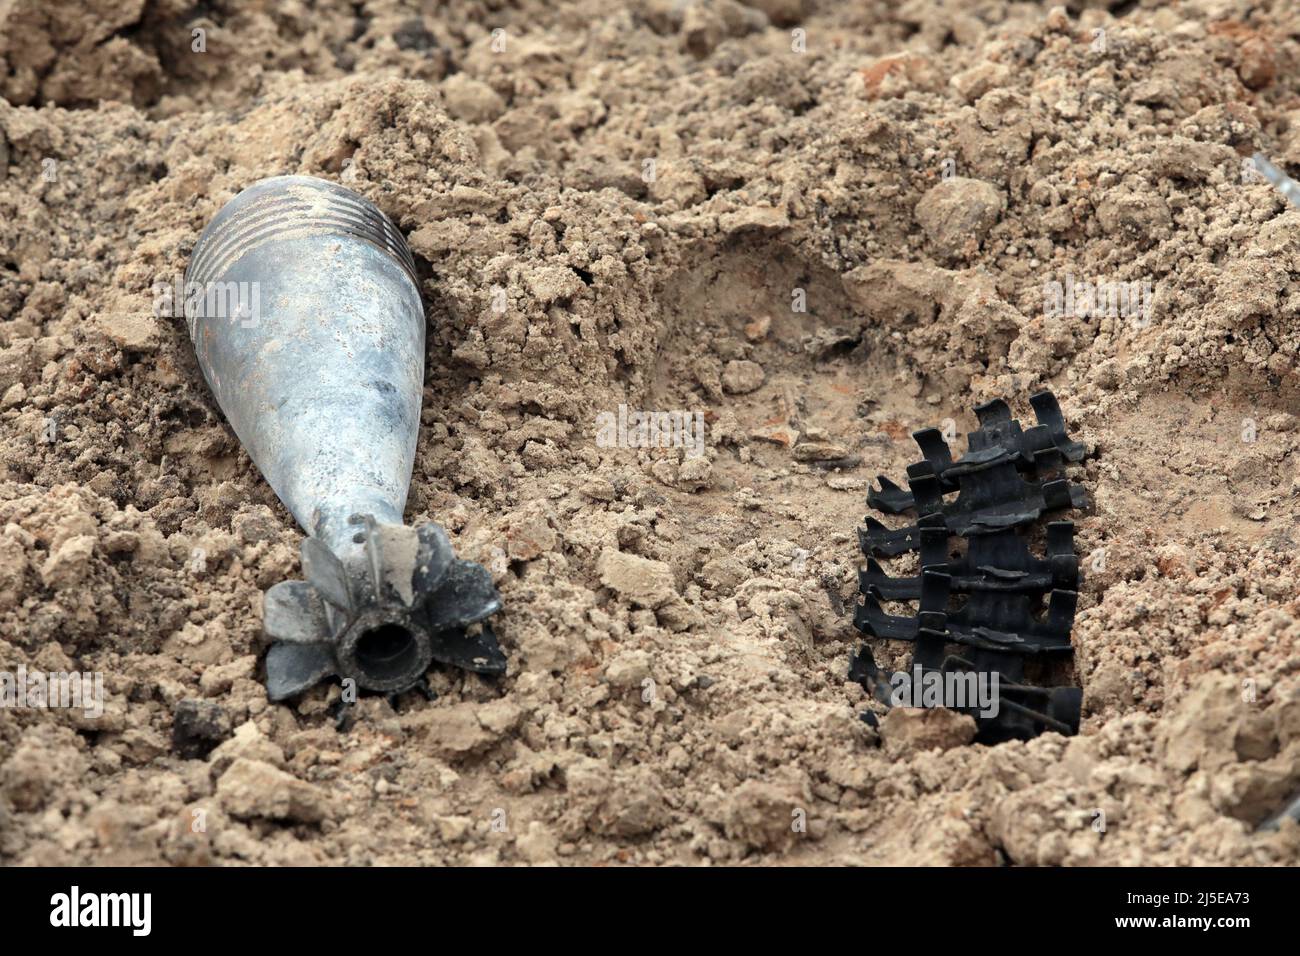 KYIV REGION, UKRAINE - APRIL 21, 2022 - Ammunition is arranged on the ground during a mine clearance mission near Bervytsia, a village liberated from Stock Photo